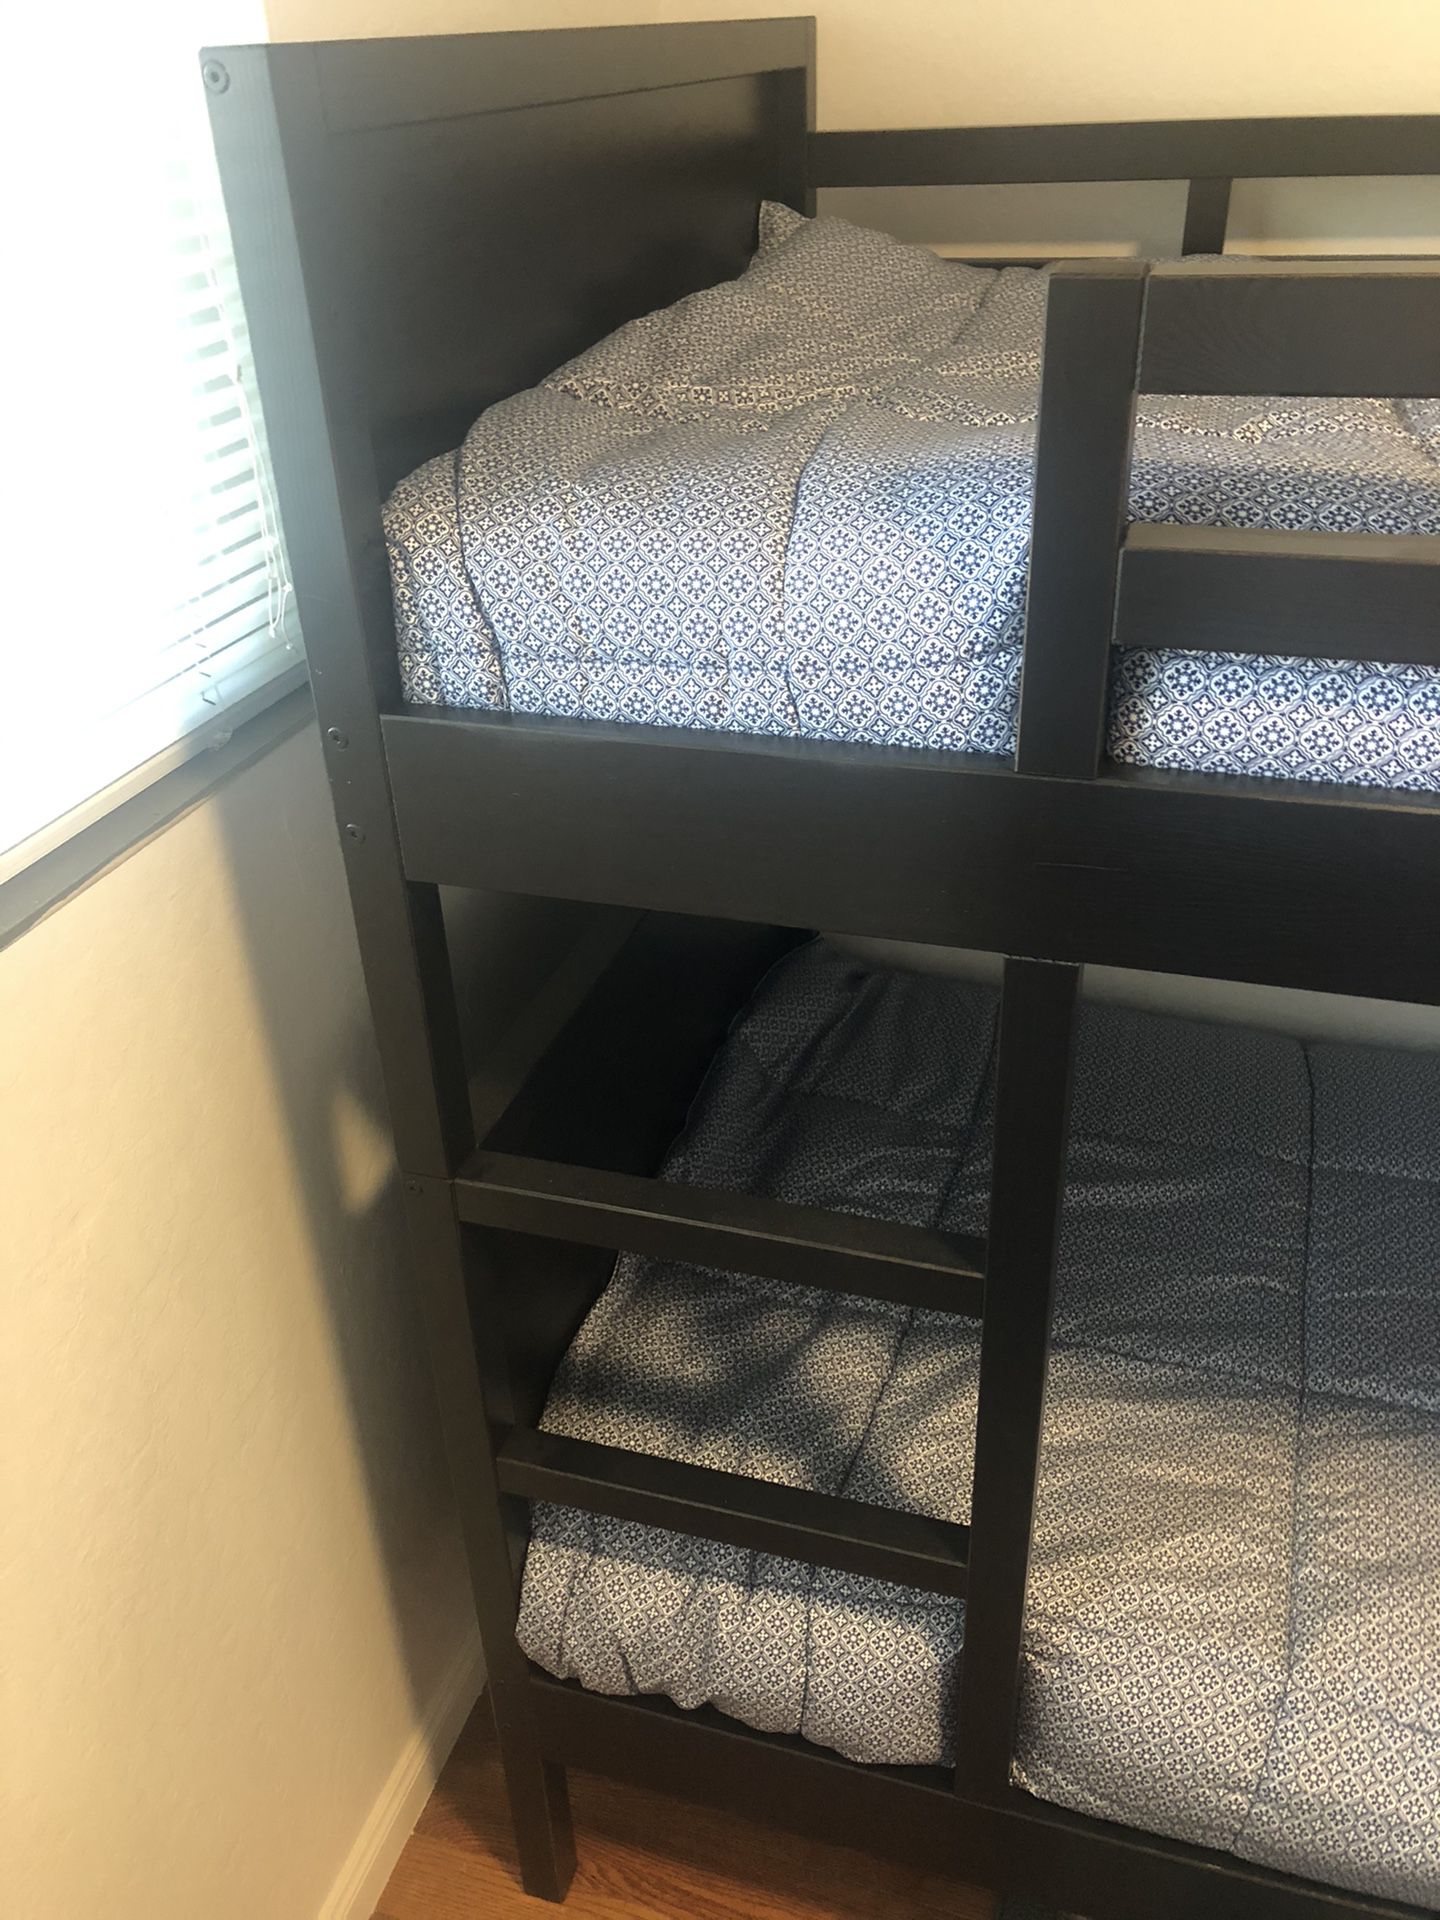 Newly Used Wood Bunk Beds w/ twin size mattresses and covers included